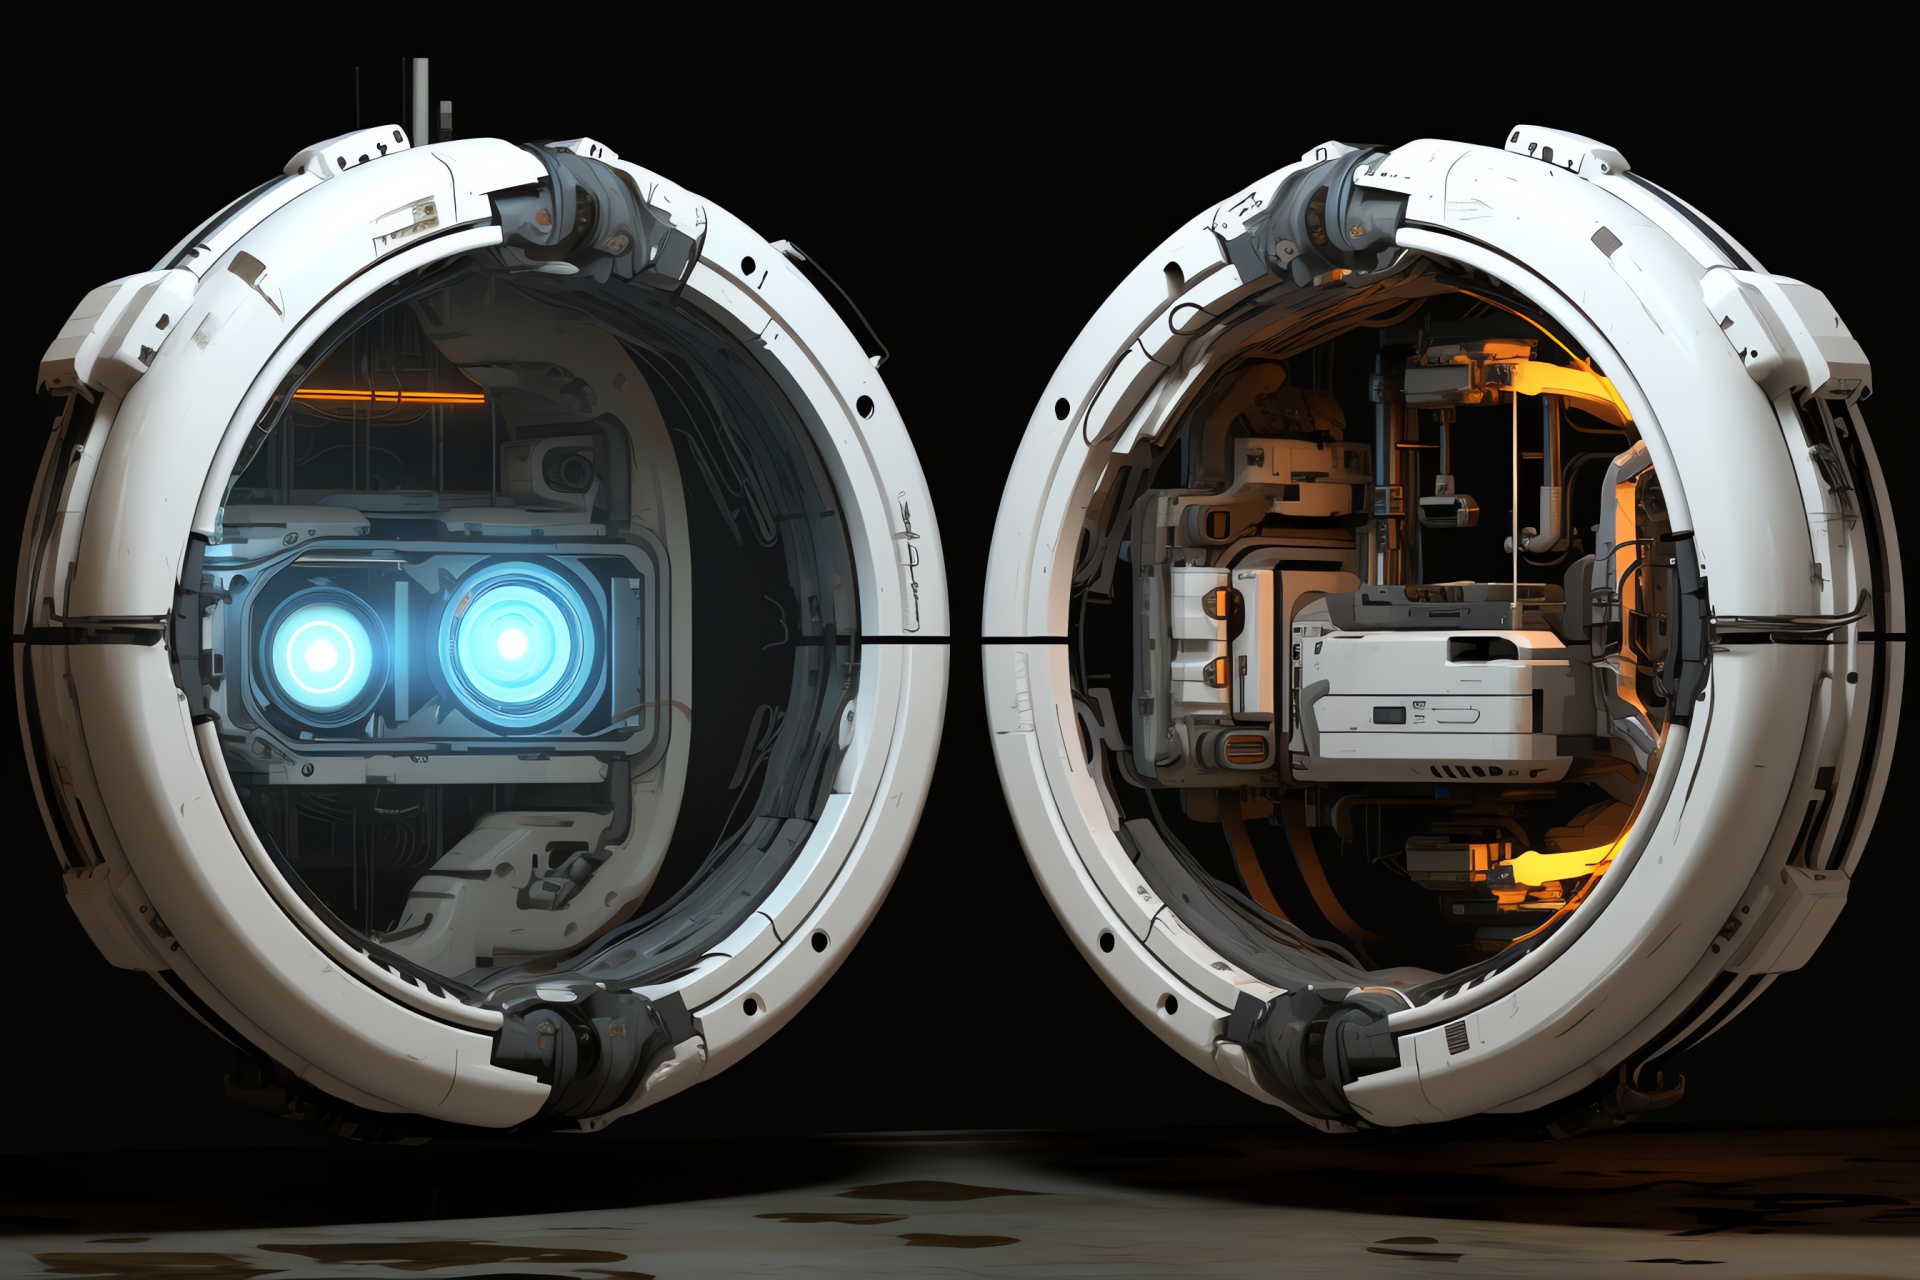 Portal game with Portal gun, Aperture Laboratories, Sci-fi gaming tool, First-person puzzle game, Innovative technology gameplay, HD Desktop Image